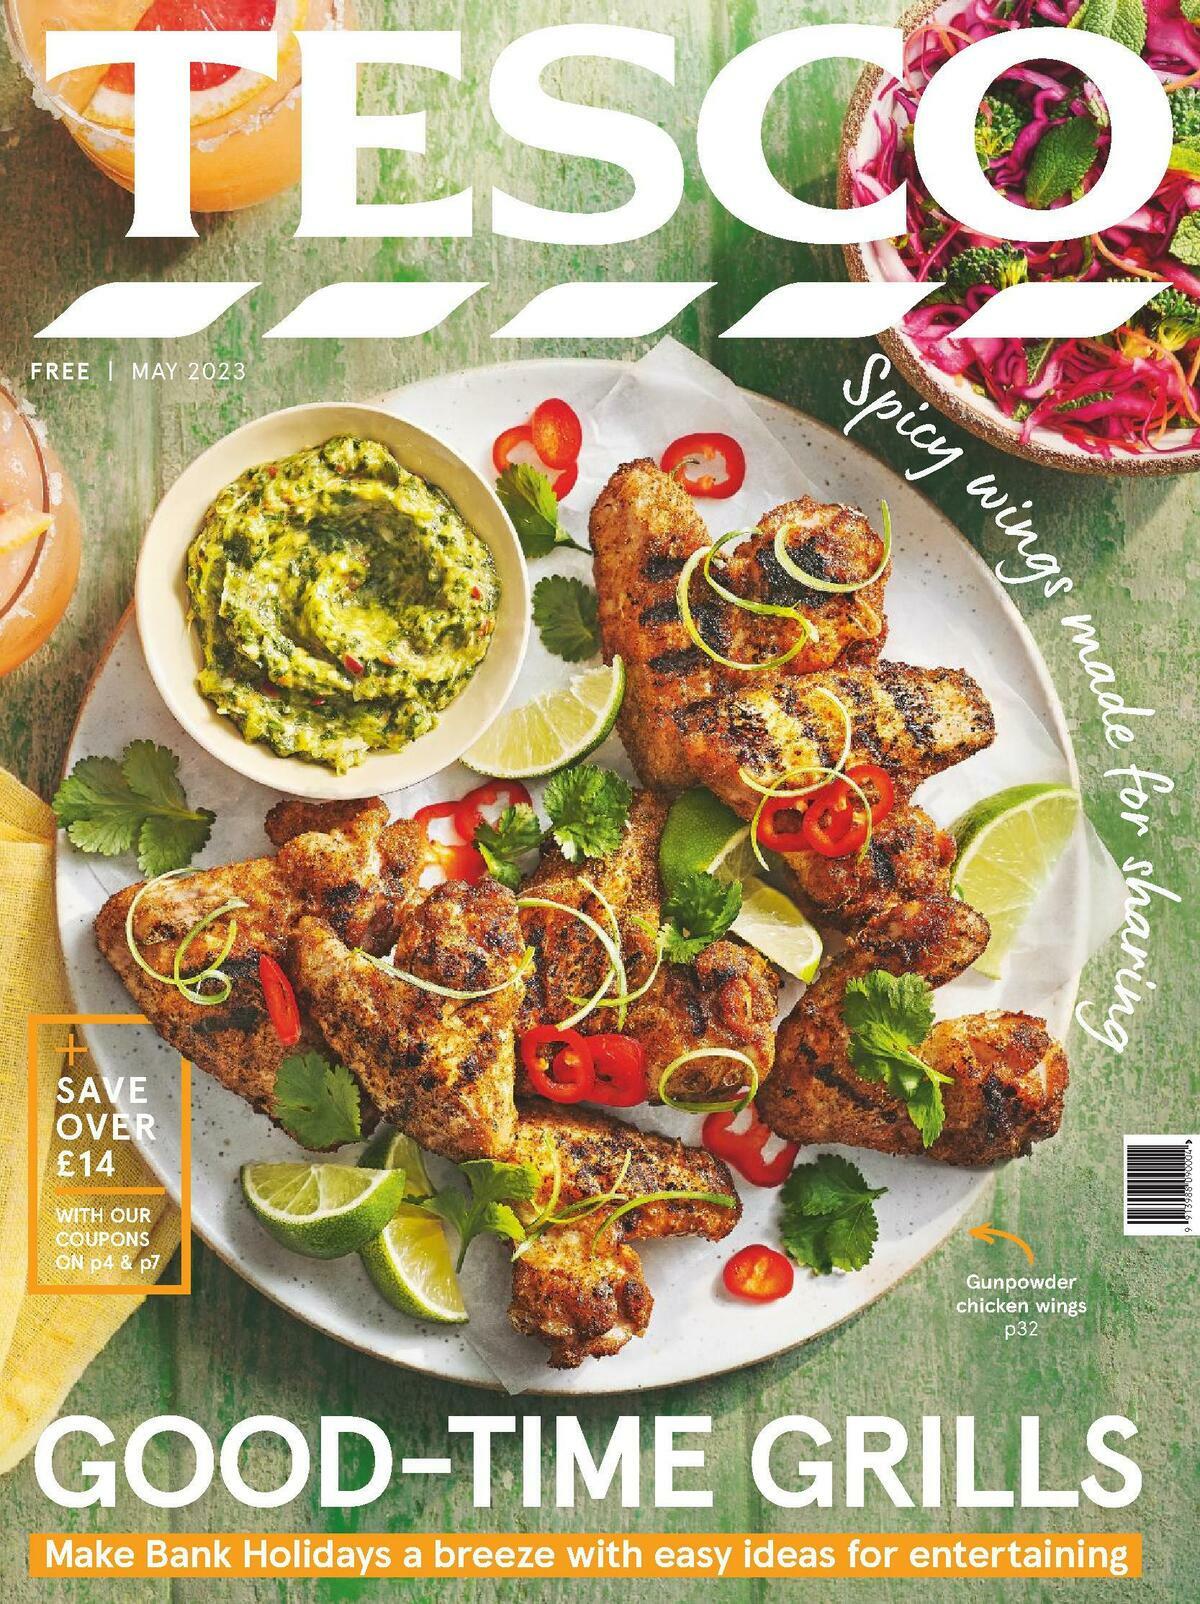 TESCO Magazine May Offers from 1 May